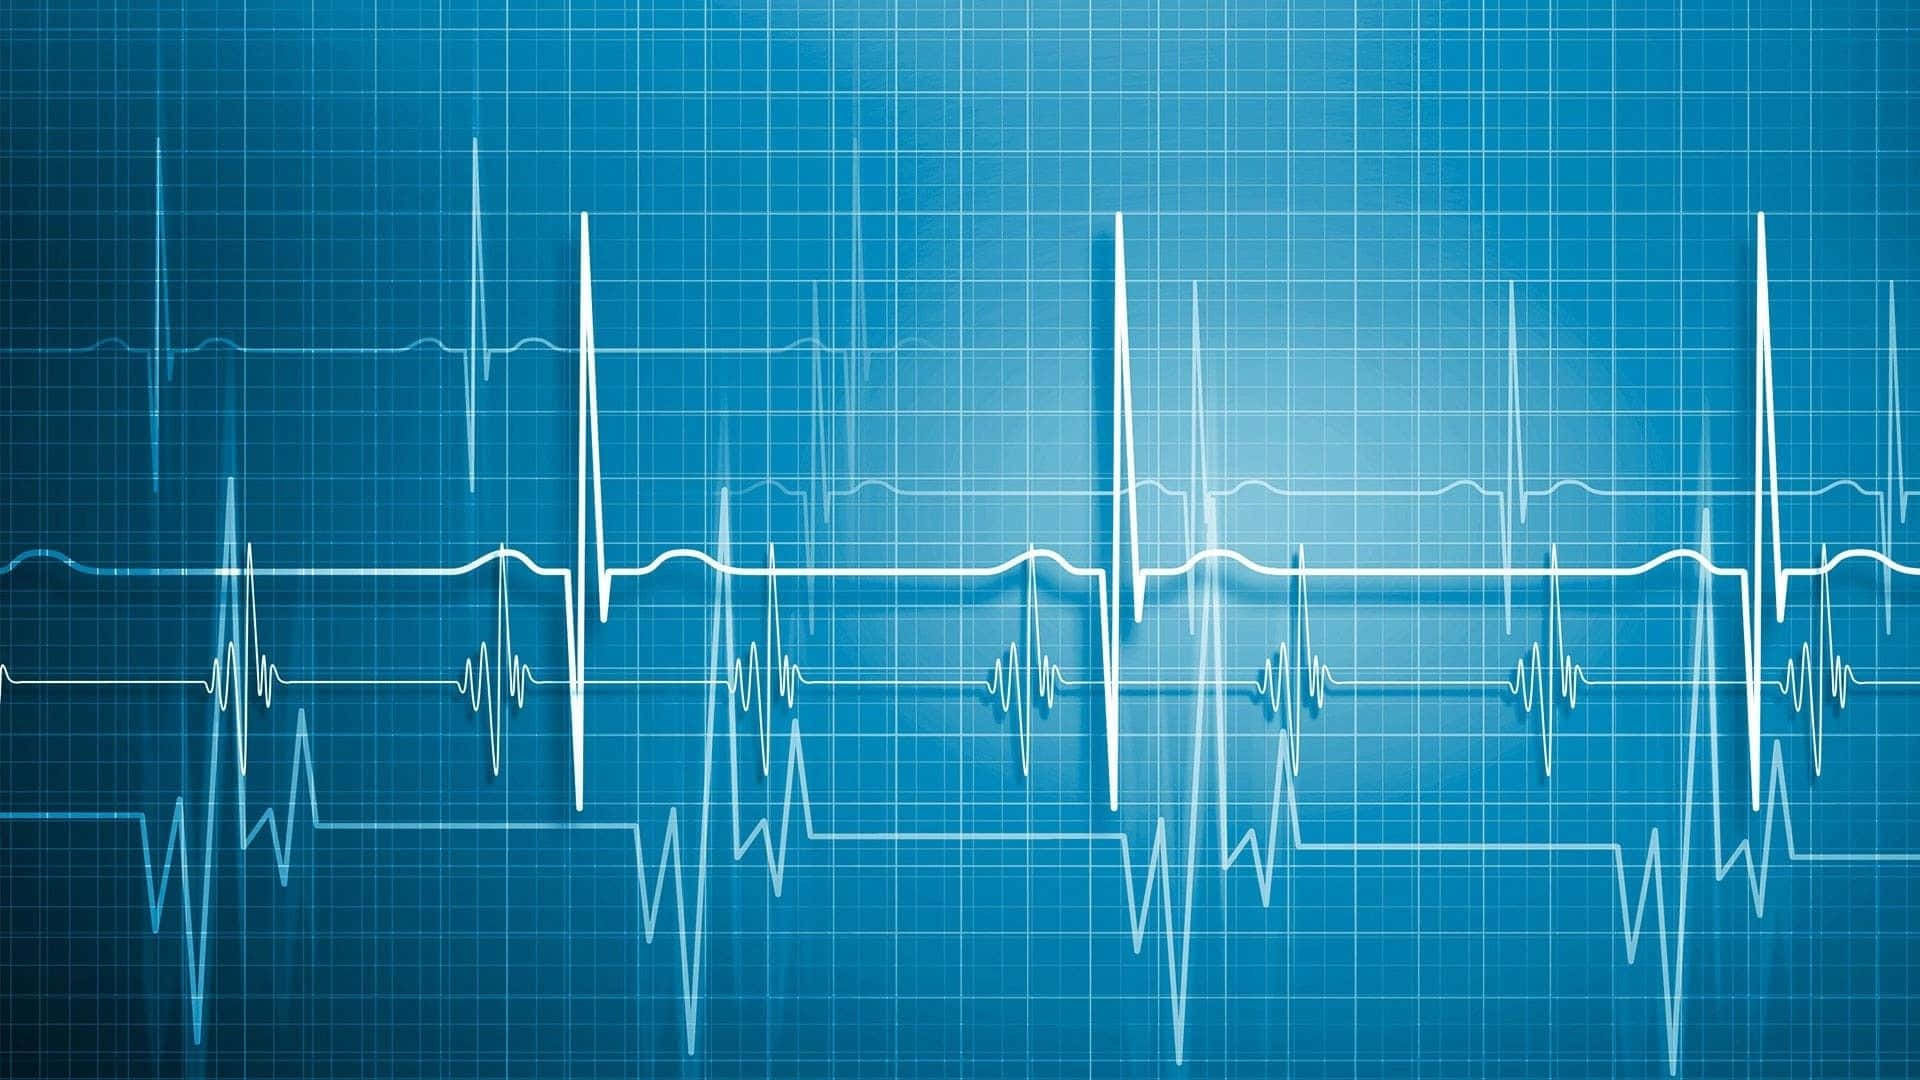 Display Of Heartbeat Rate In High Definition Background